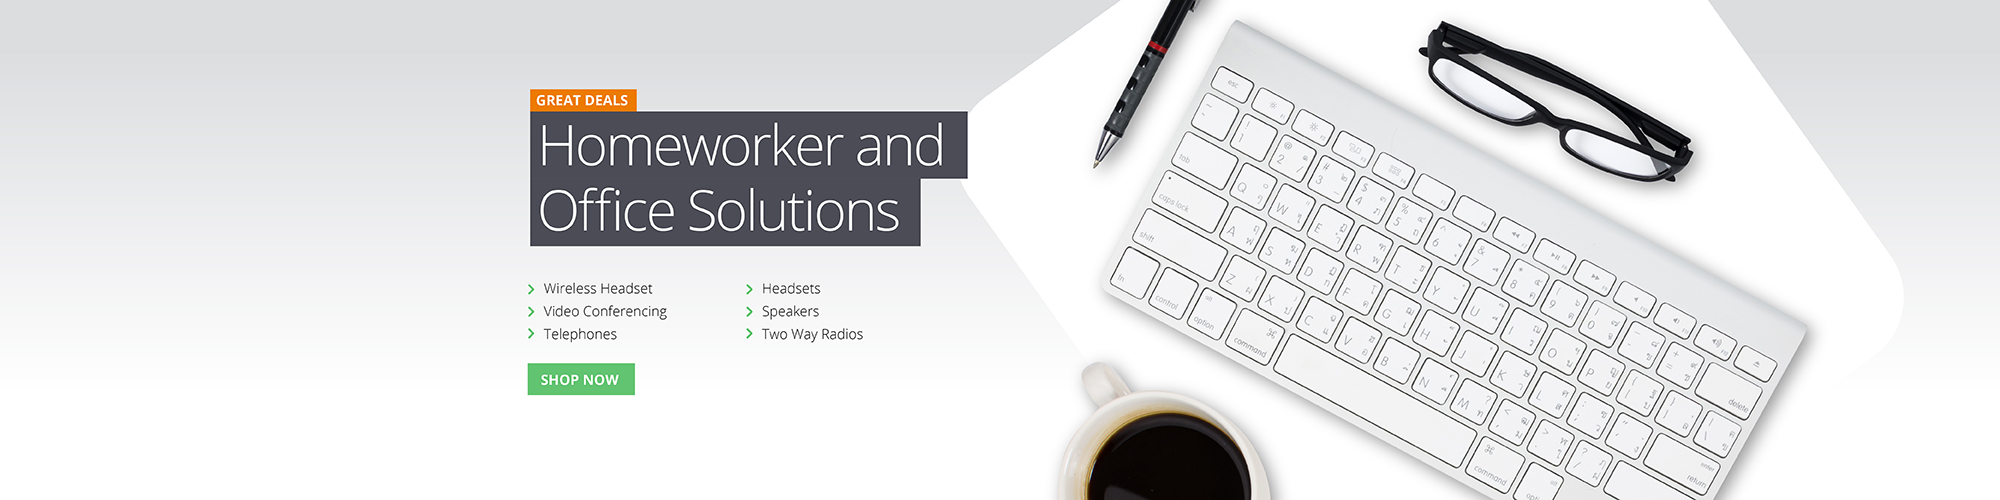 Office and Homeworker solutions